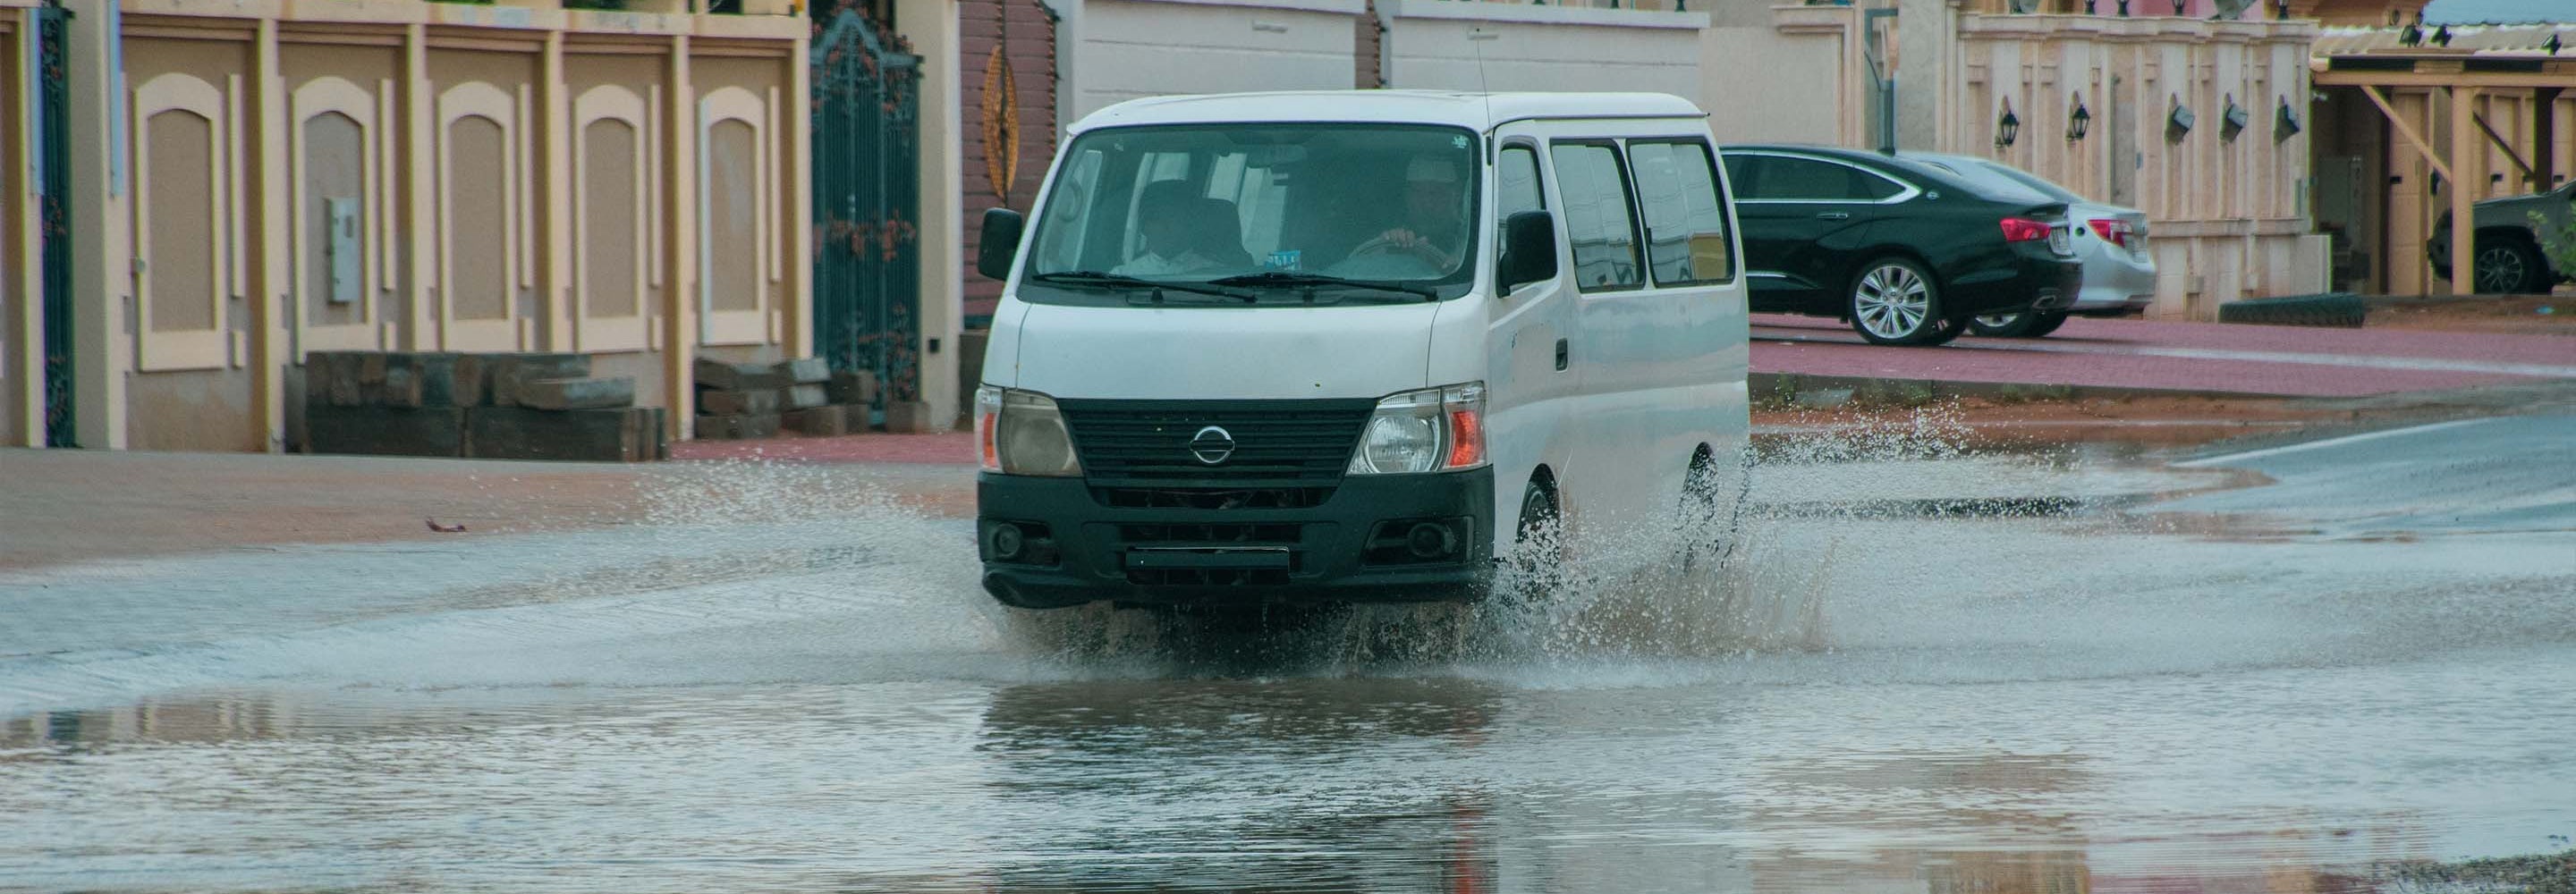 There is flooding in Abu Dhabi. Protect yourself from mold and follow health recommendations. Click here.